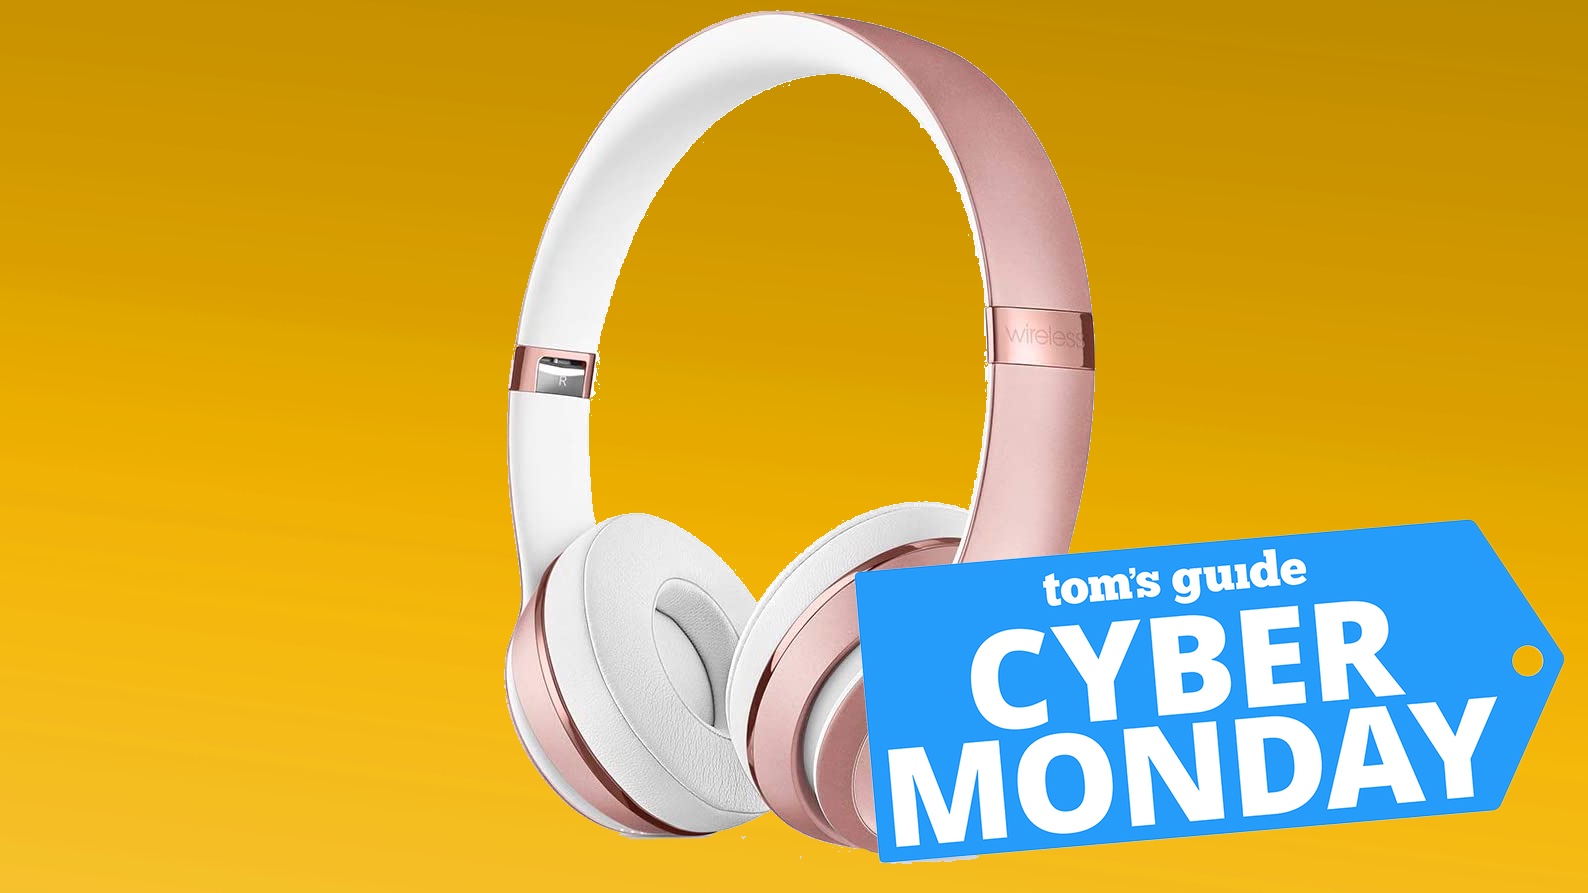 Beats Solo3 cyber monday deal